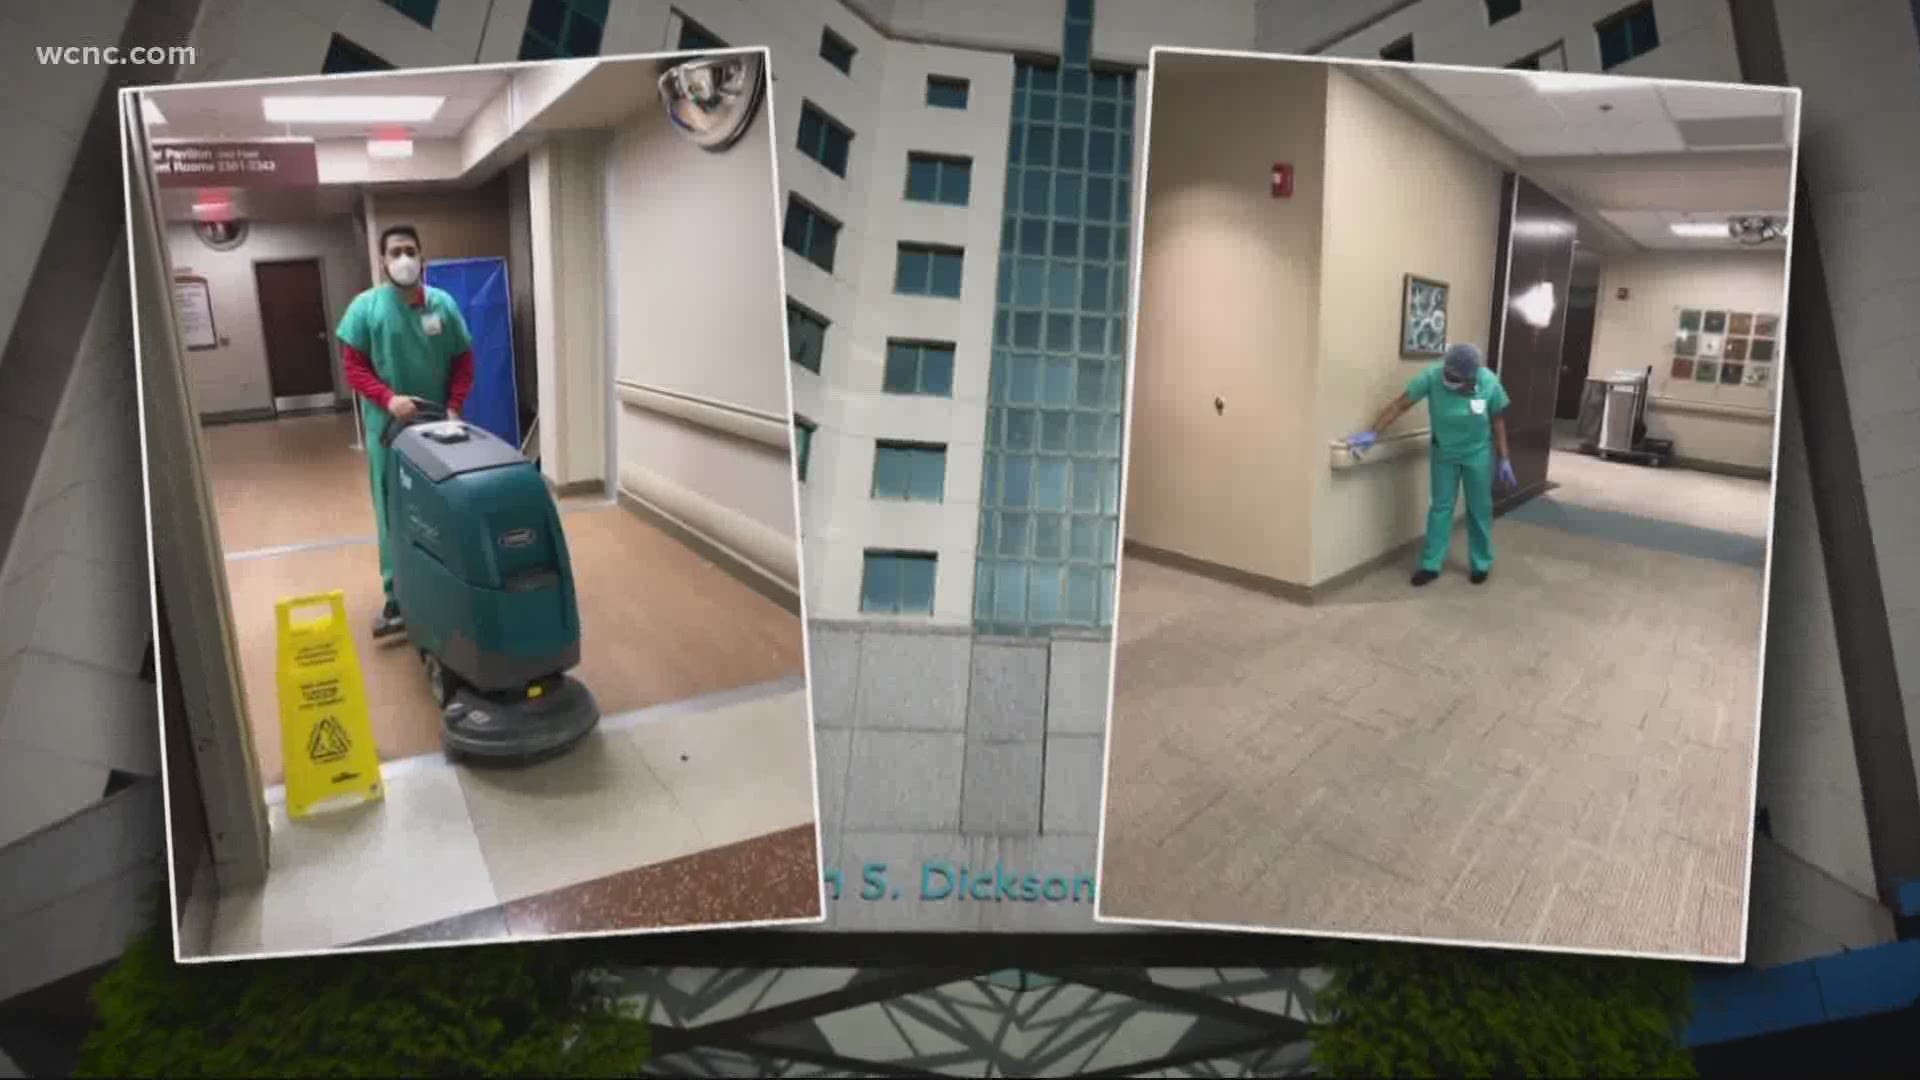 It's a scary time for hospital sanitization workers. They're used to keeping the hospital clean, but now that's even more important.